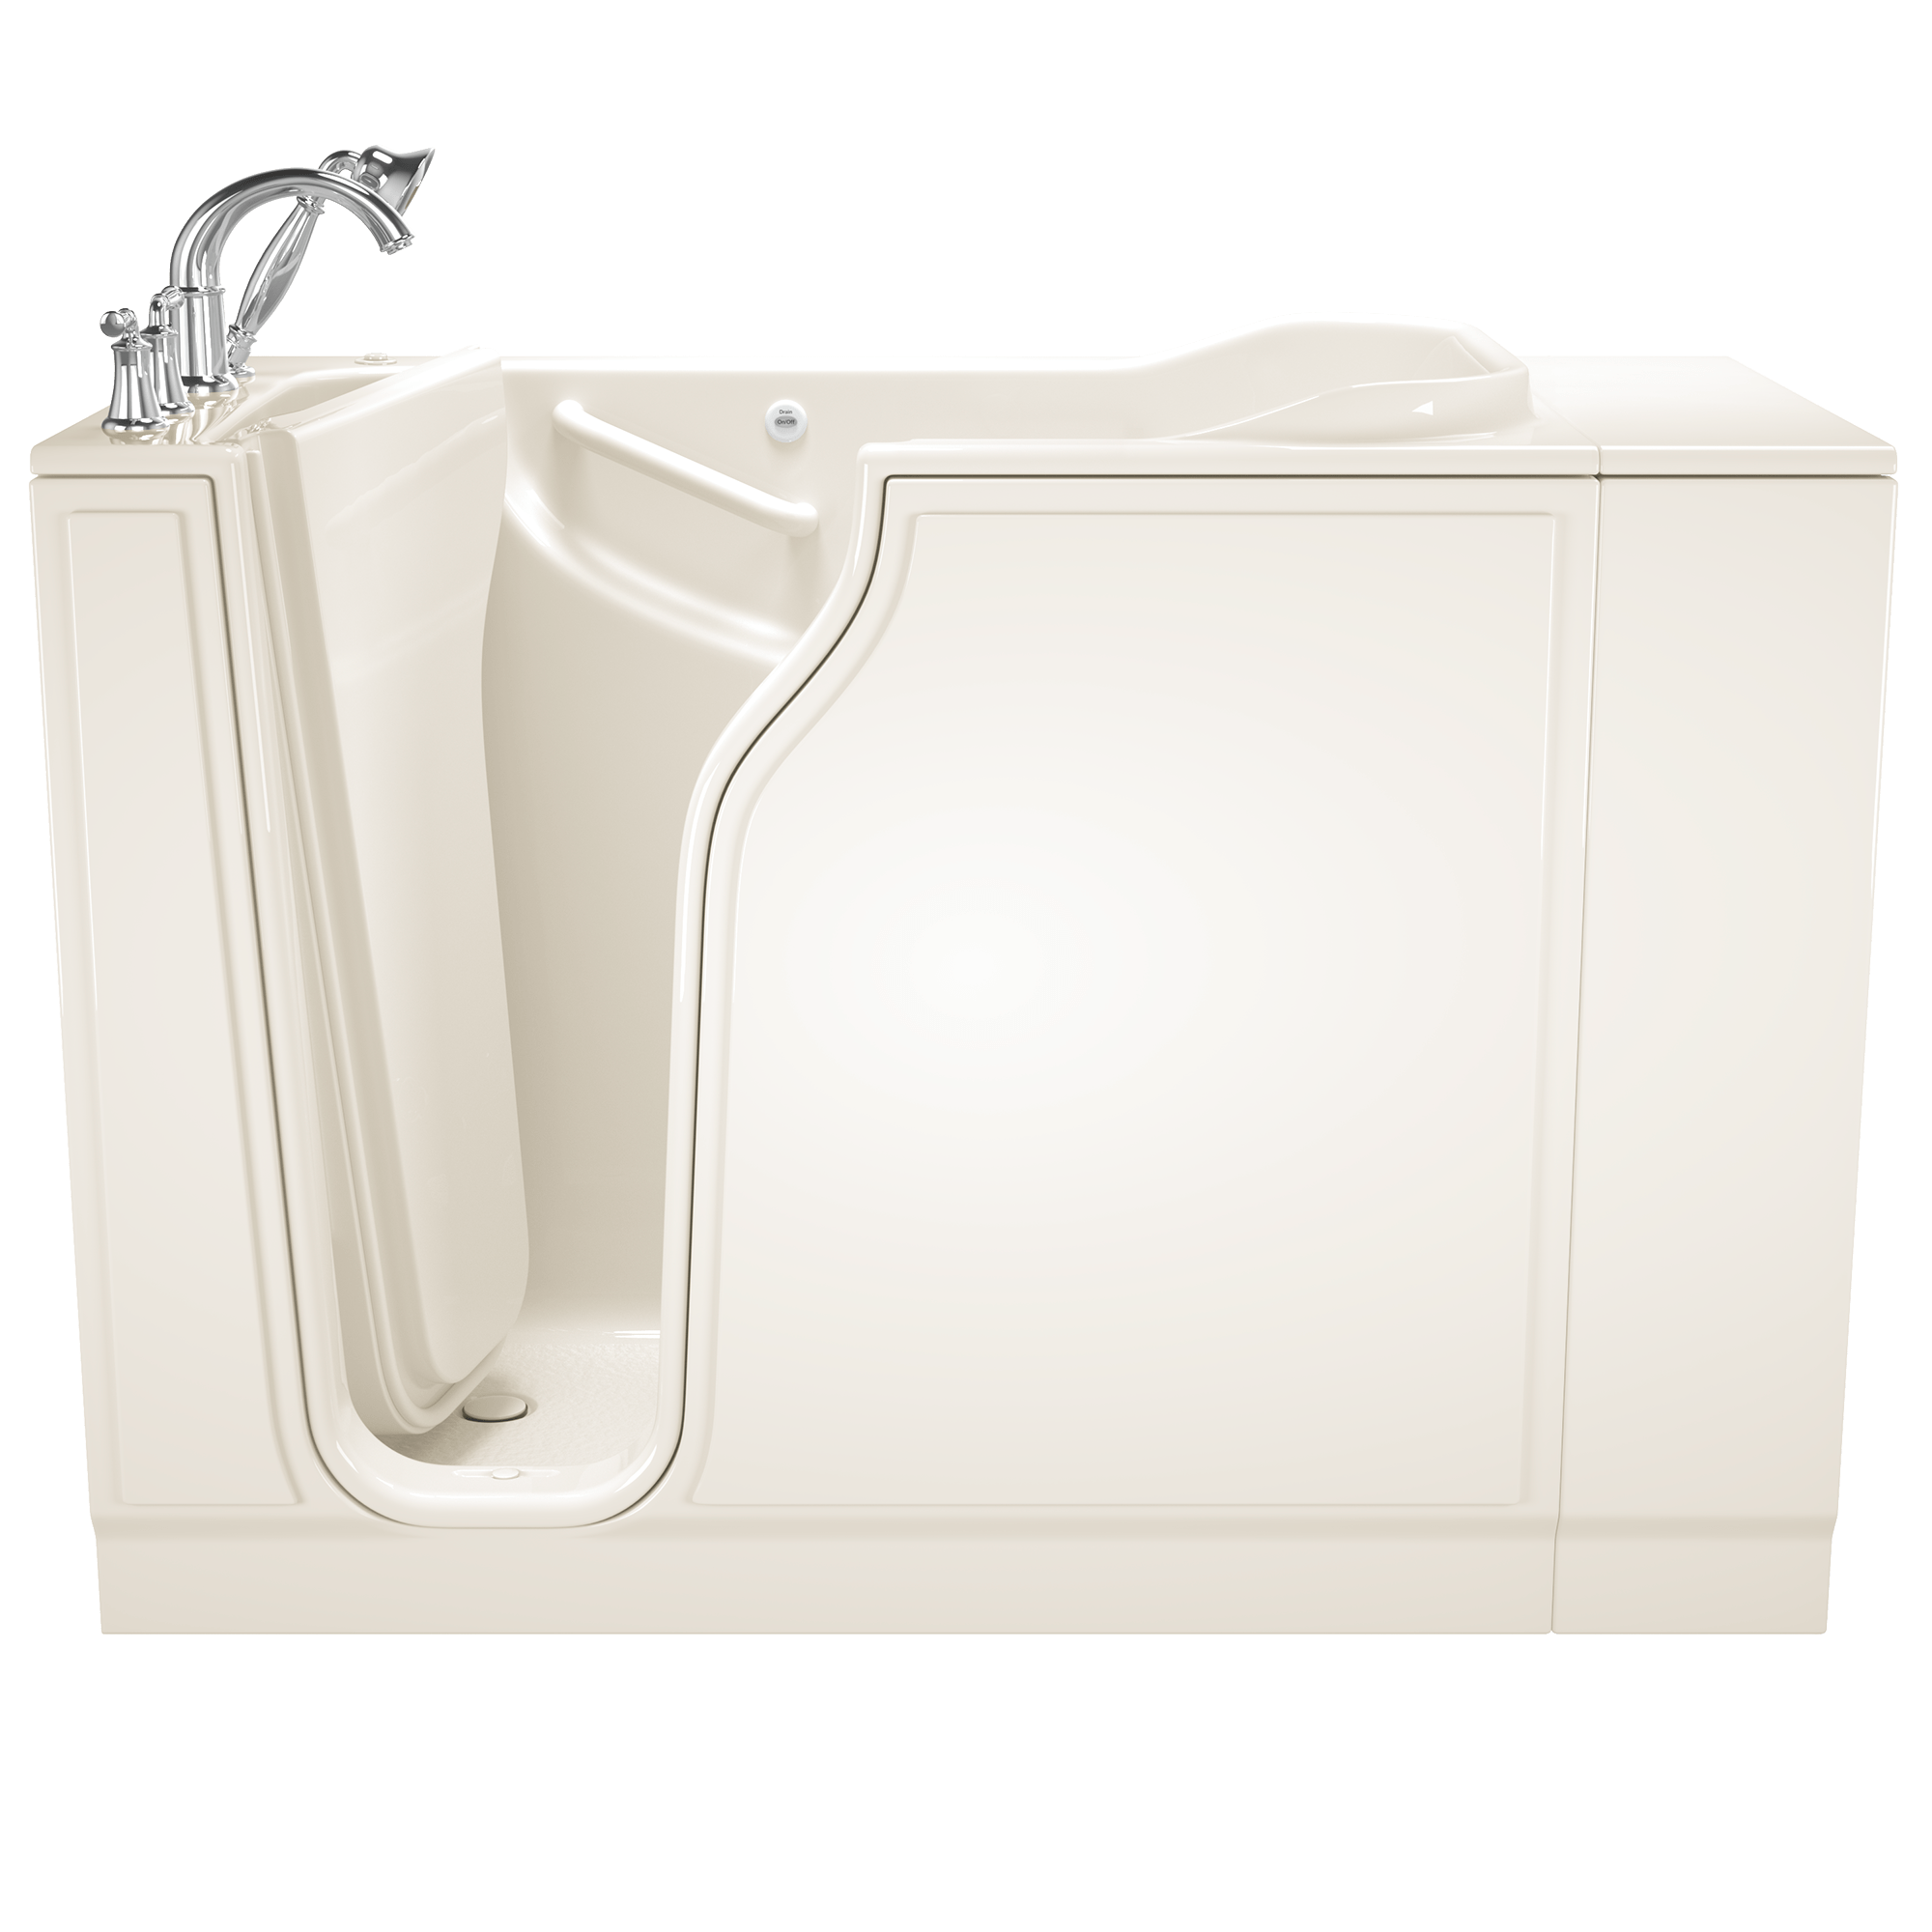 Gelcoat Value Series 30x52 Inch Walk-In Bathtub with Whirlpool Massage System - Left Hand Door and Drain